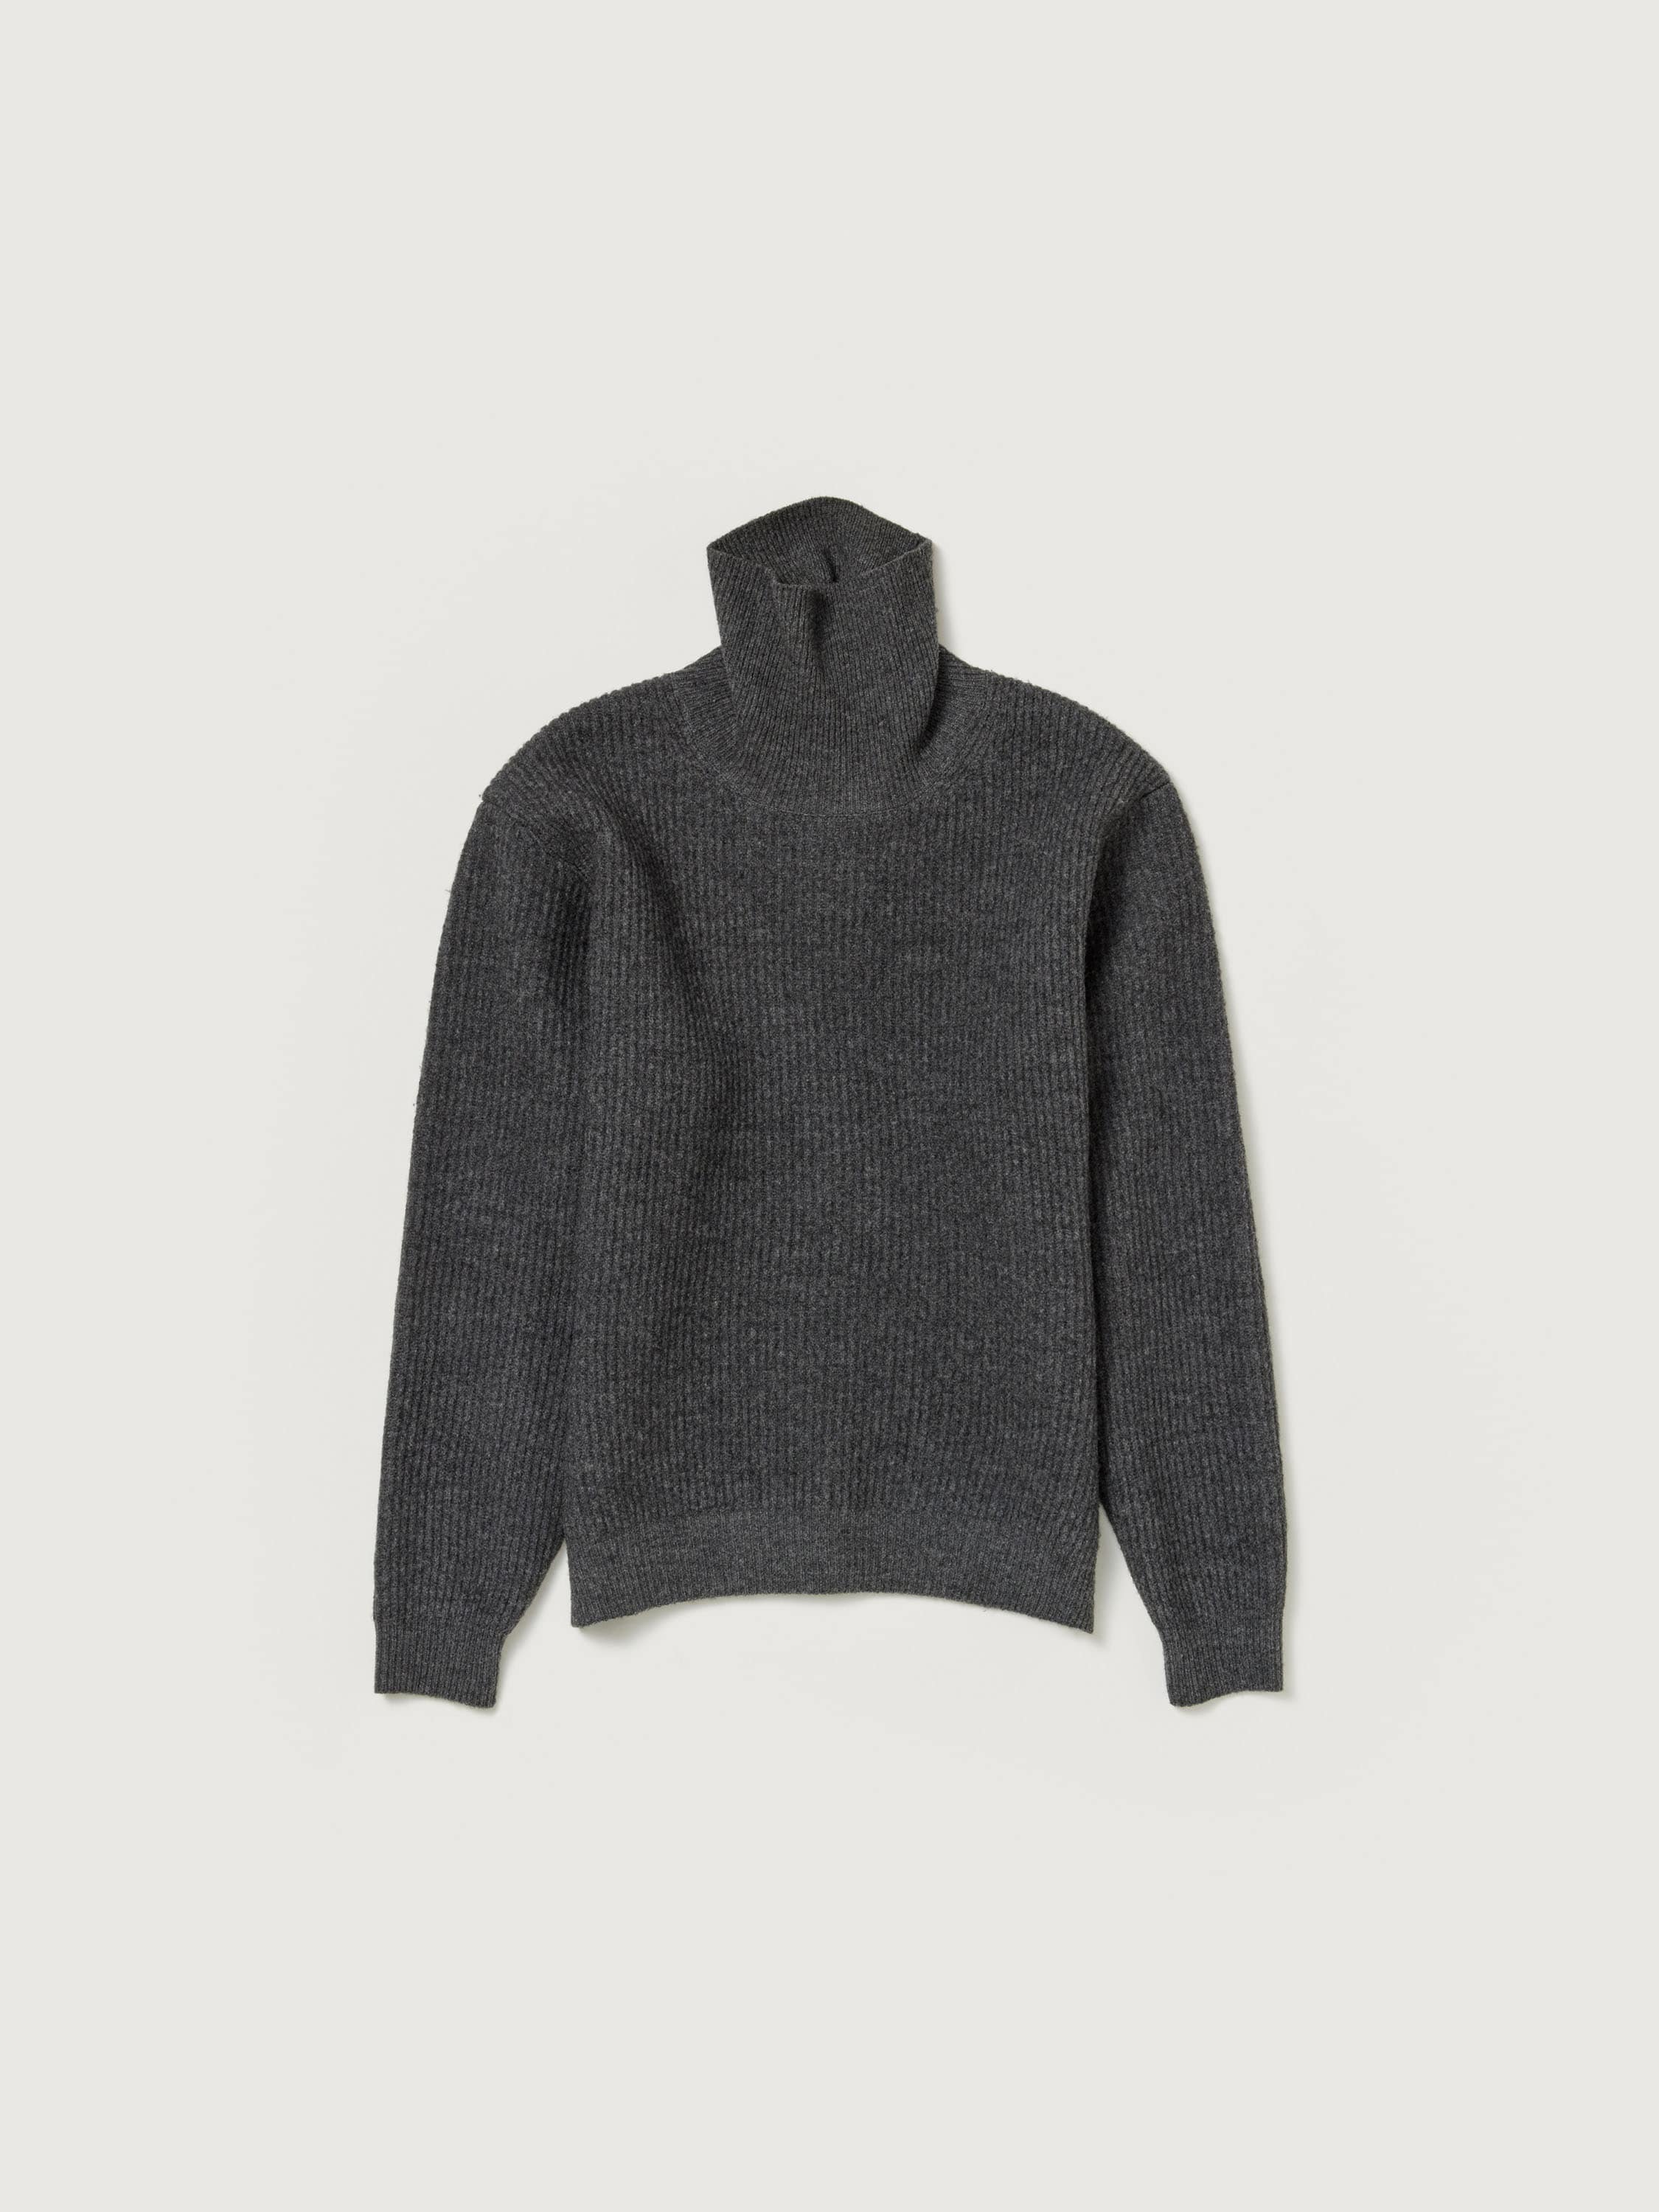 MILLED FRENCH MERINO RIB KNIT TURTLE 詳細画像 CHARCOAL GRAY 1